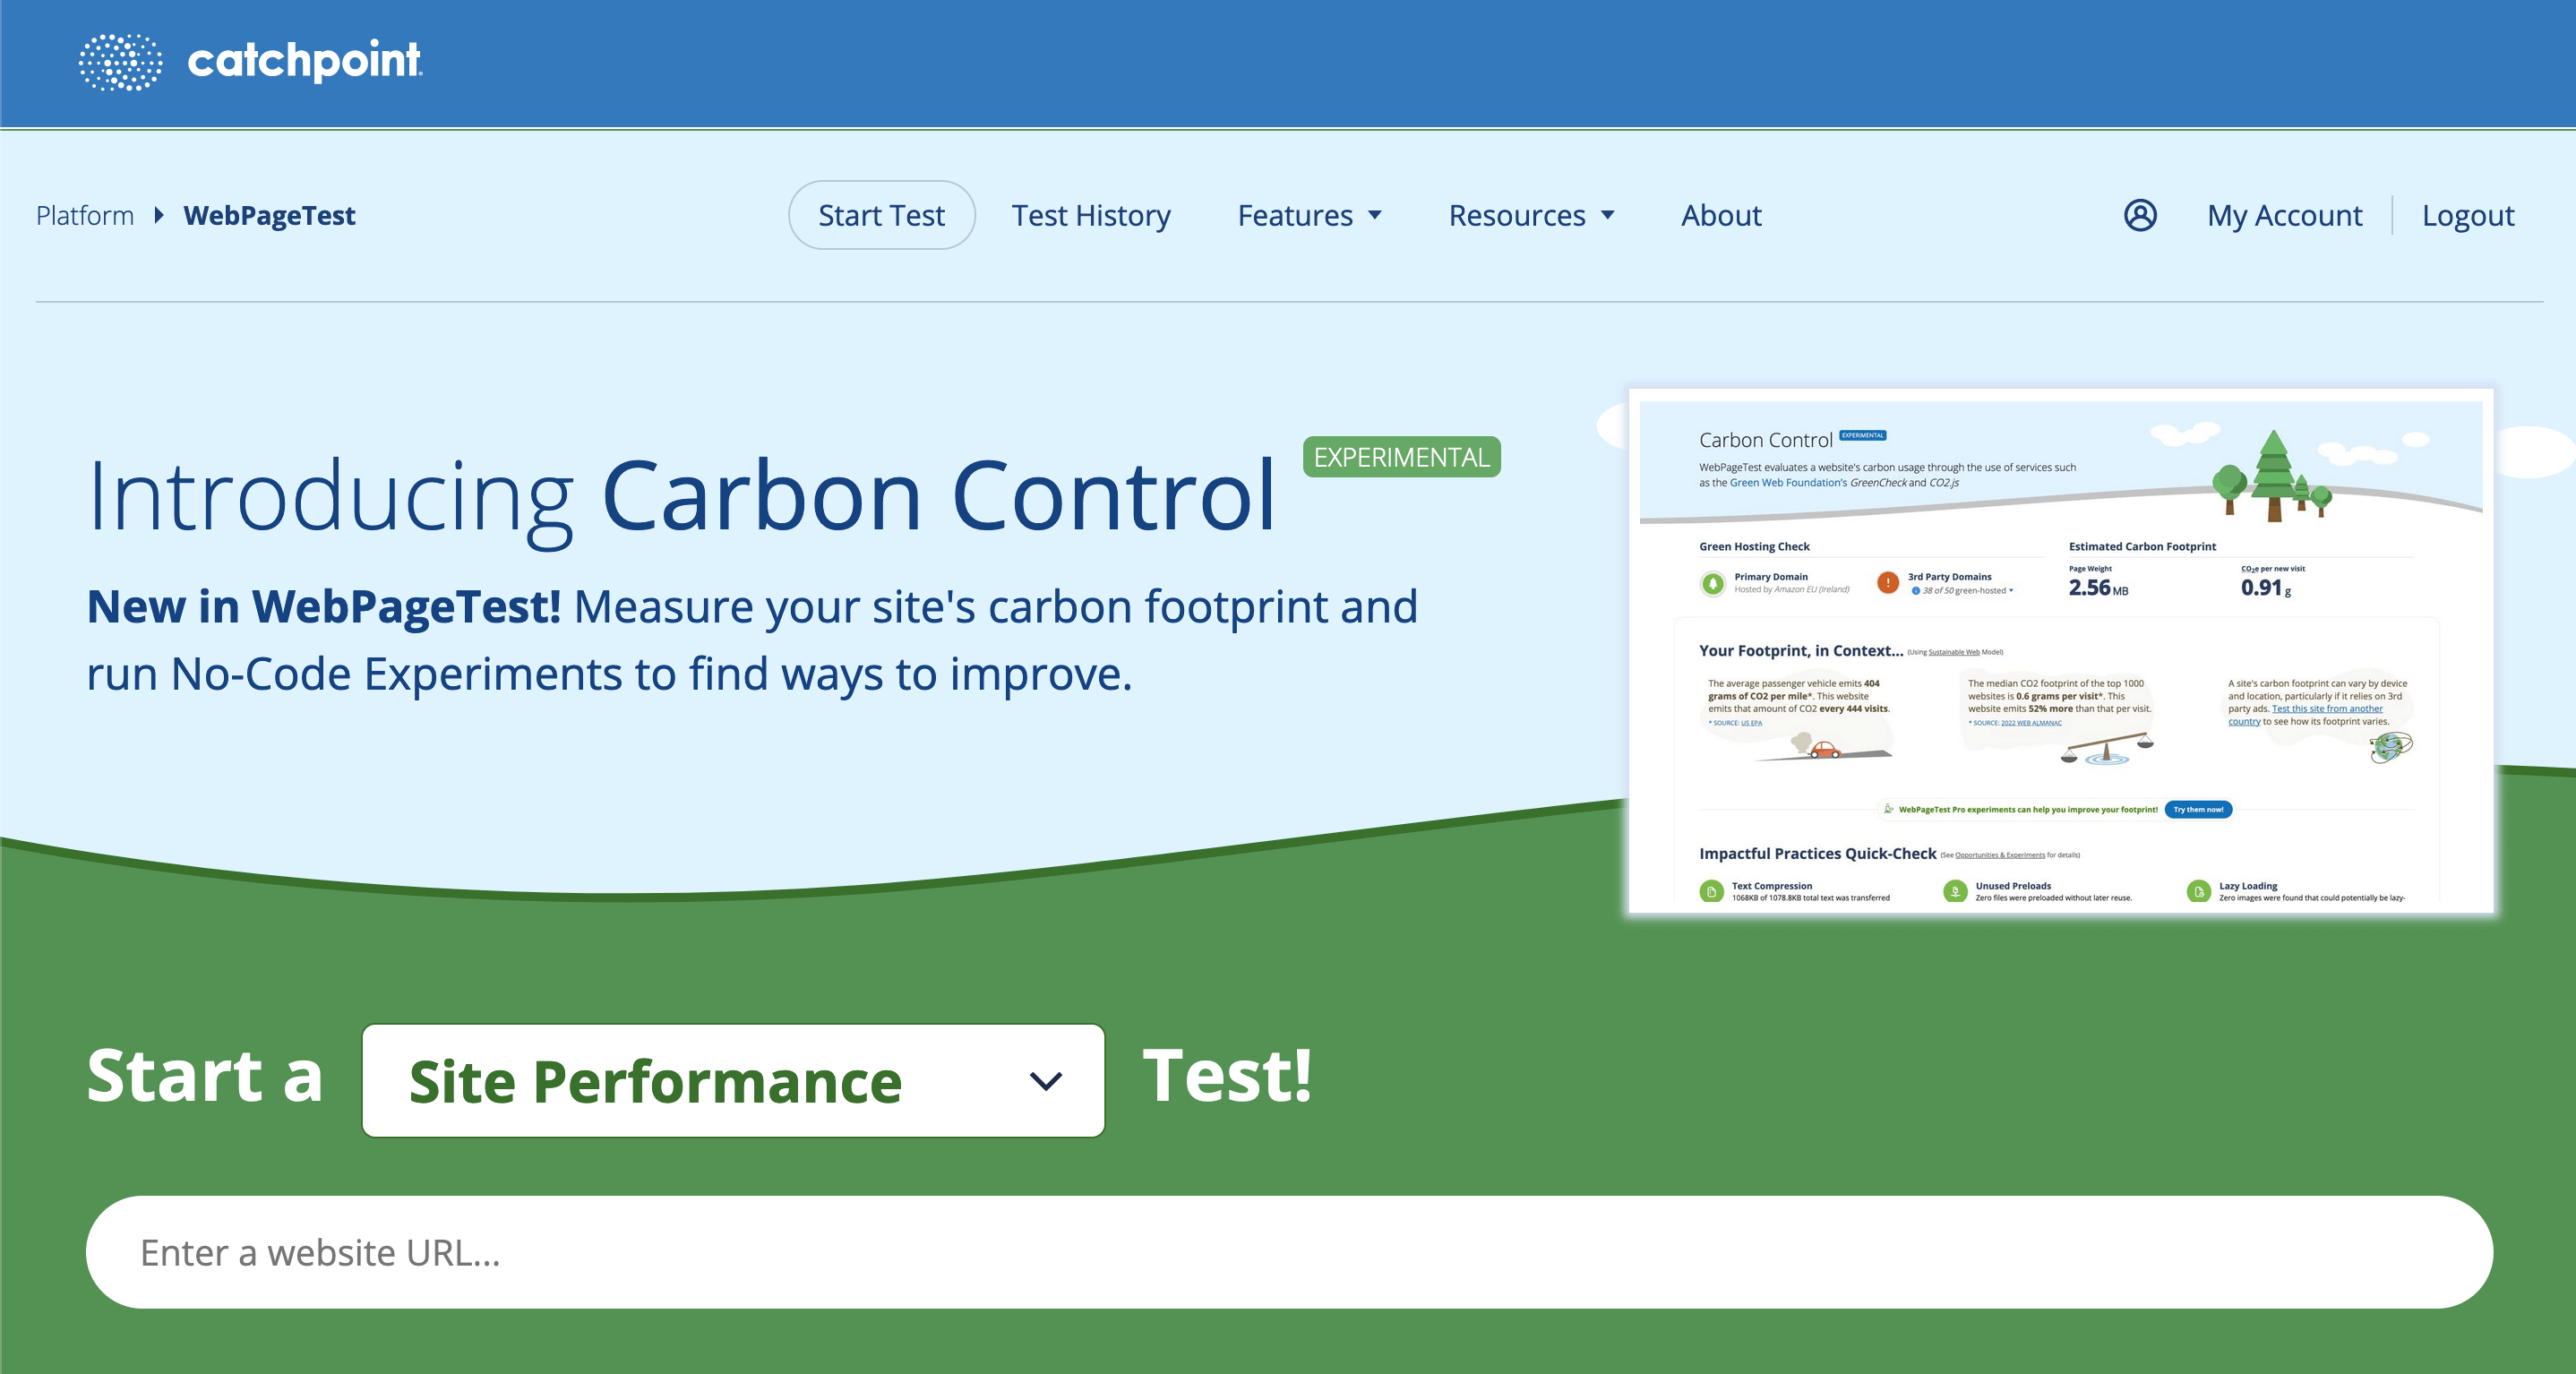 A screenshot of part of WebPageTest’s home page showing the experimental Carbon Control feature with the text Introducing Carbon Control, New in WebPageTest - Measure your site's carbon footprint and run No-Code Experiments to find ways to improve